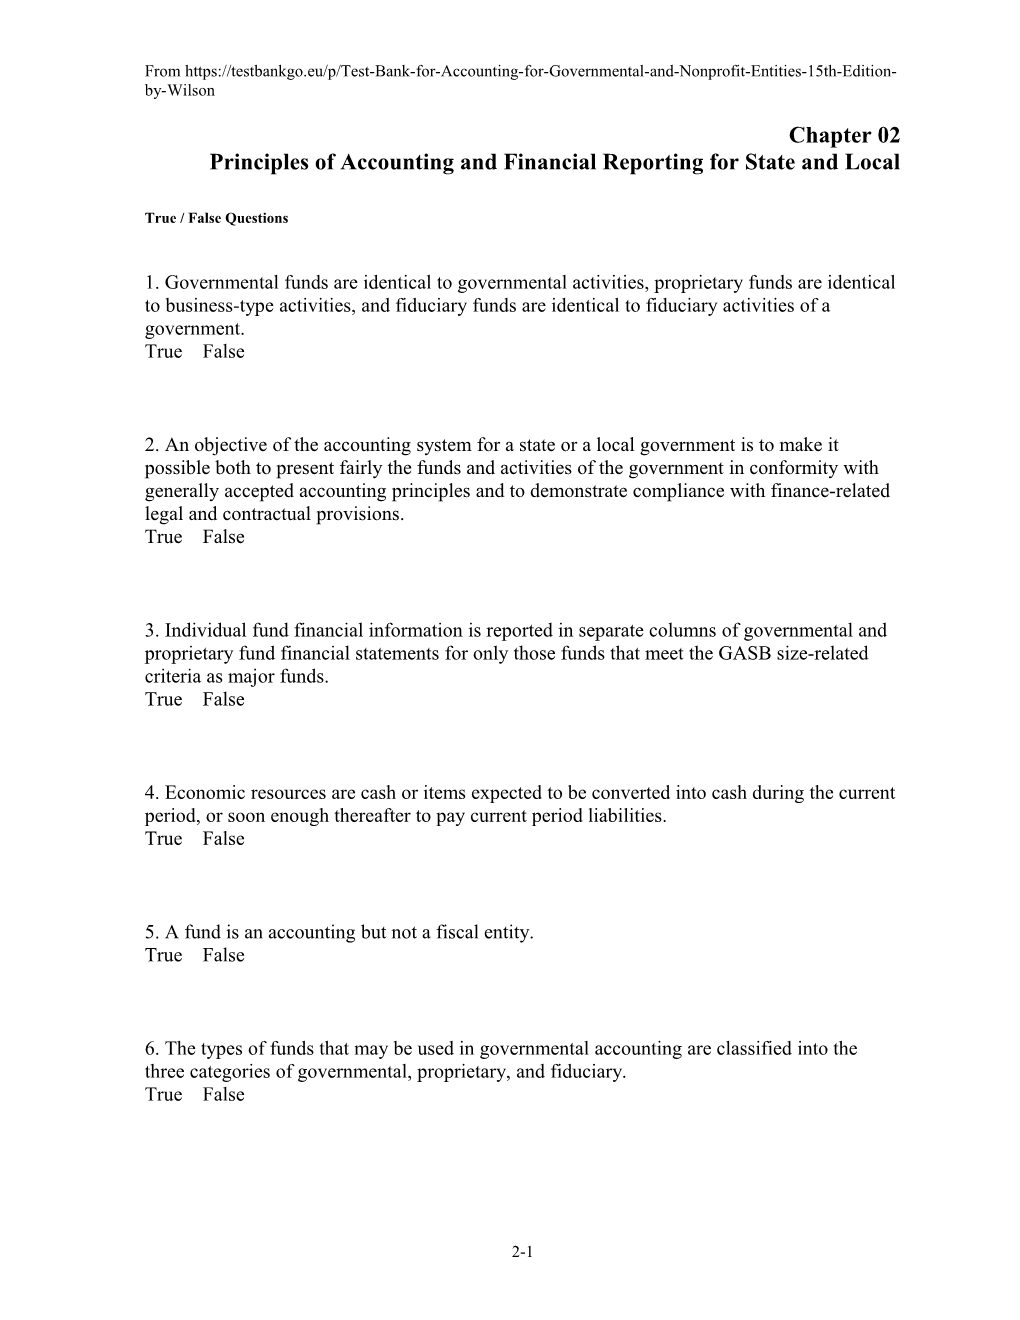 Chapter 02 Principles of Accounting and Financial Reporting for State and Local